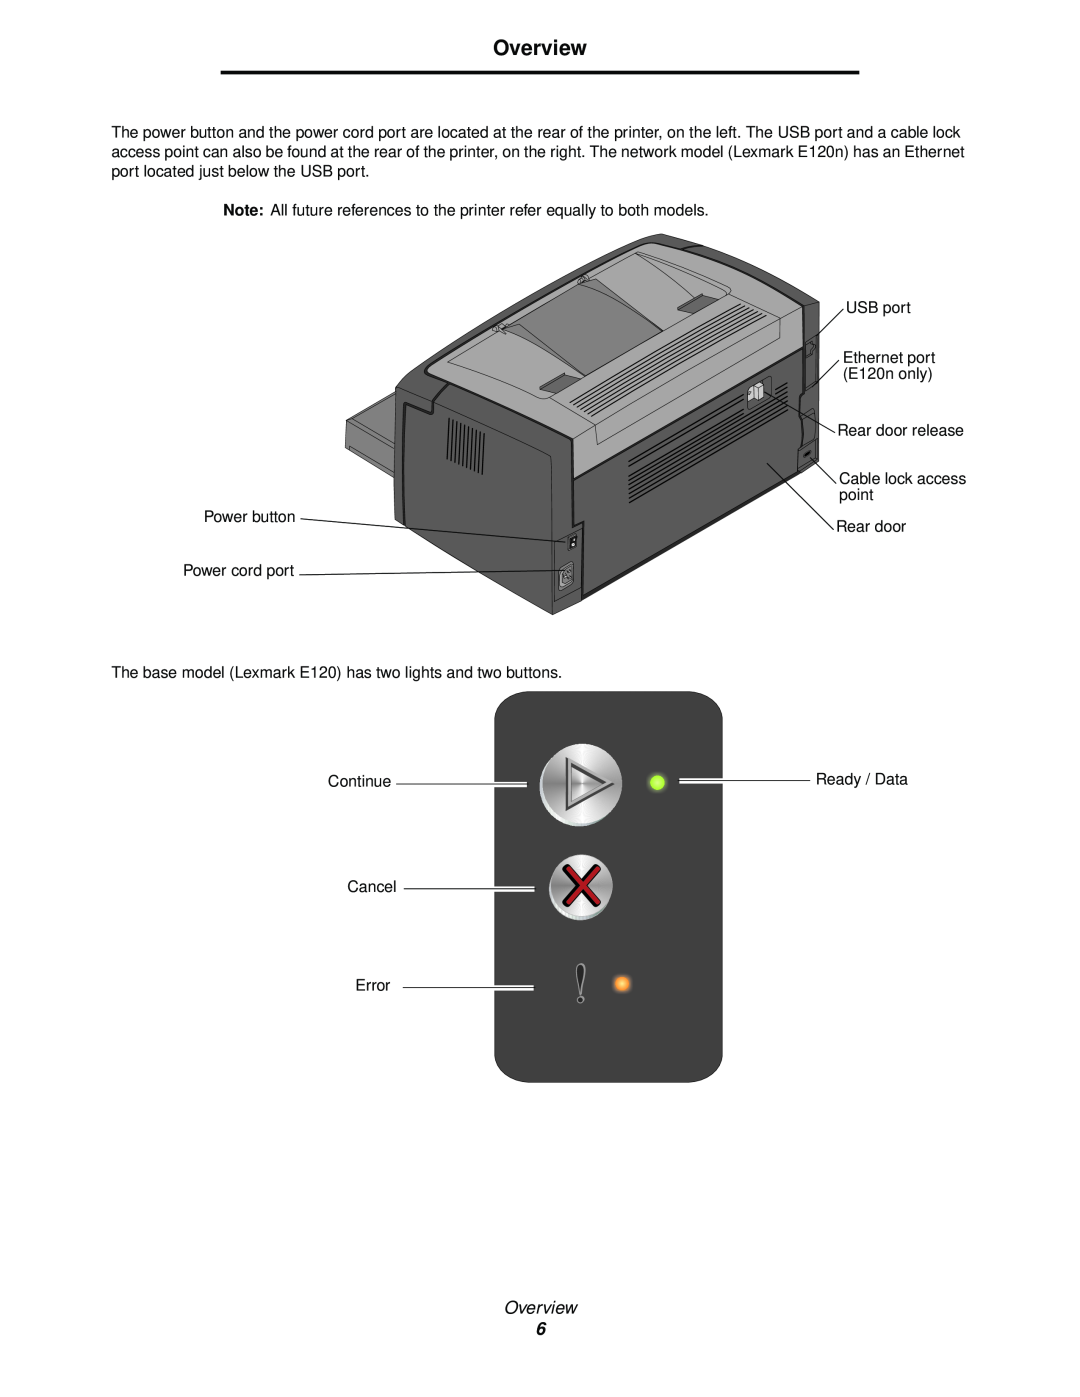 Lexmark 120 manual Overview 